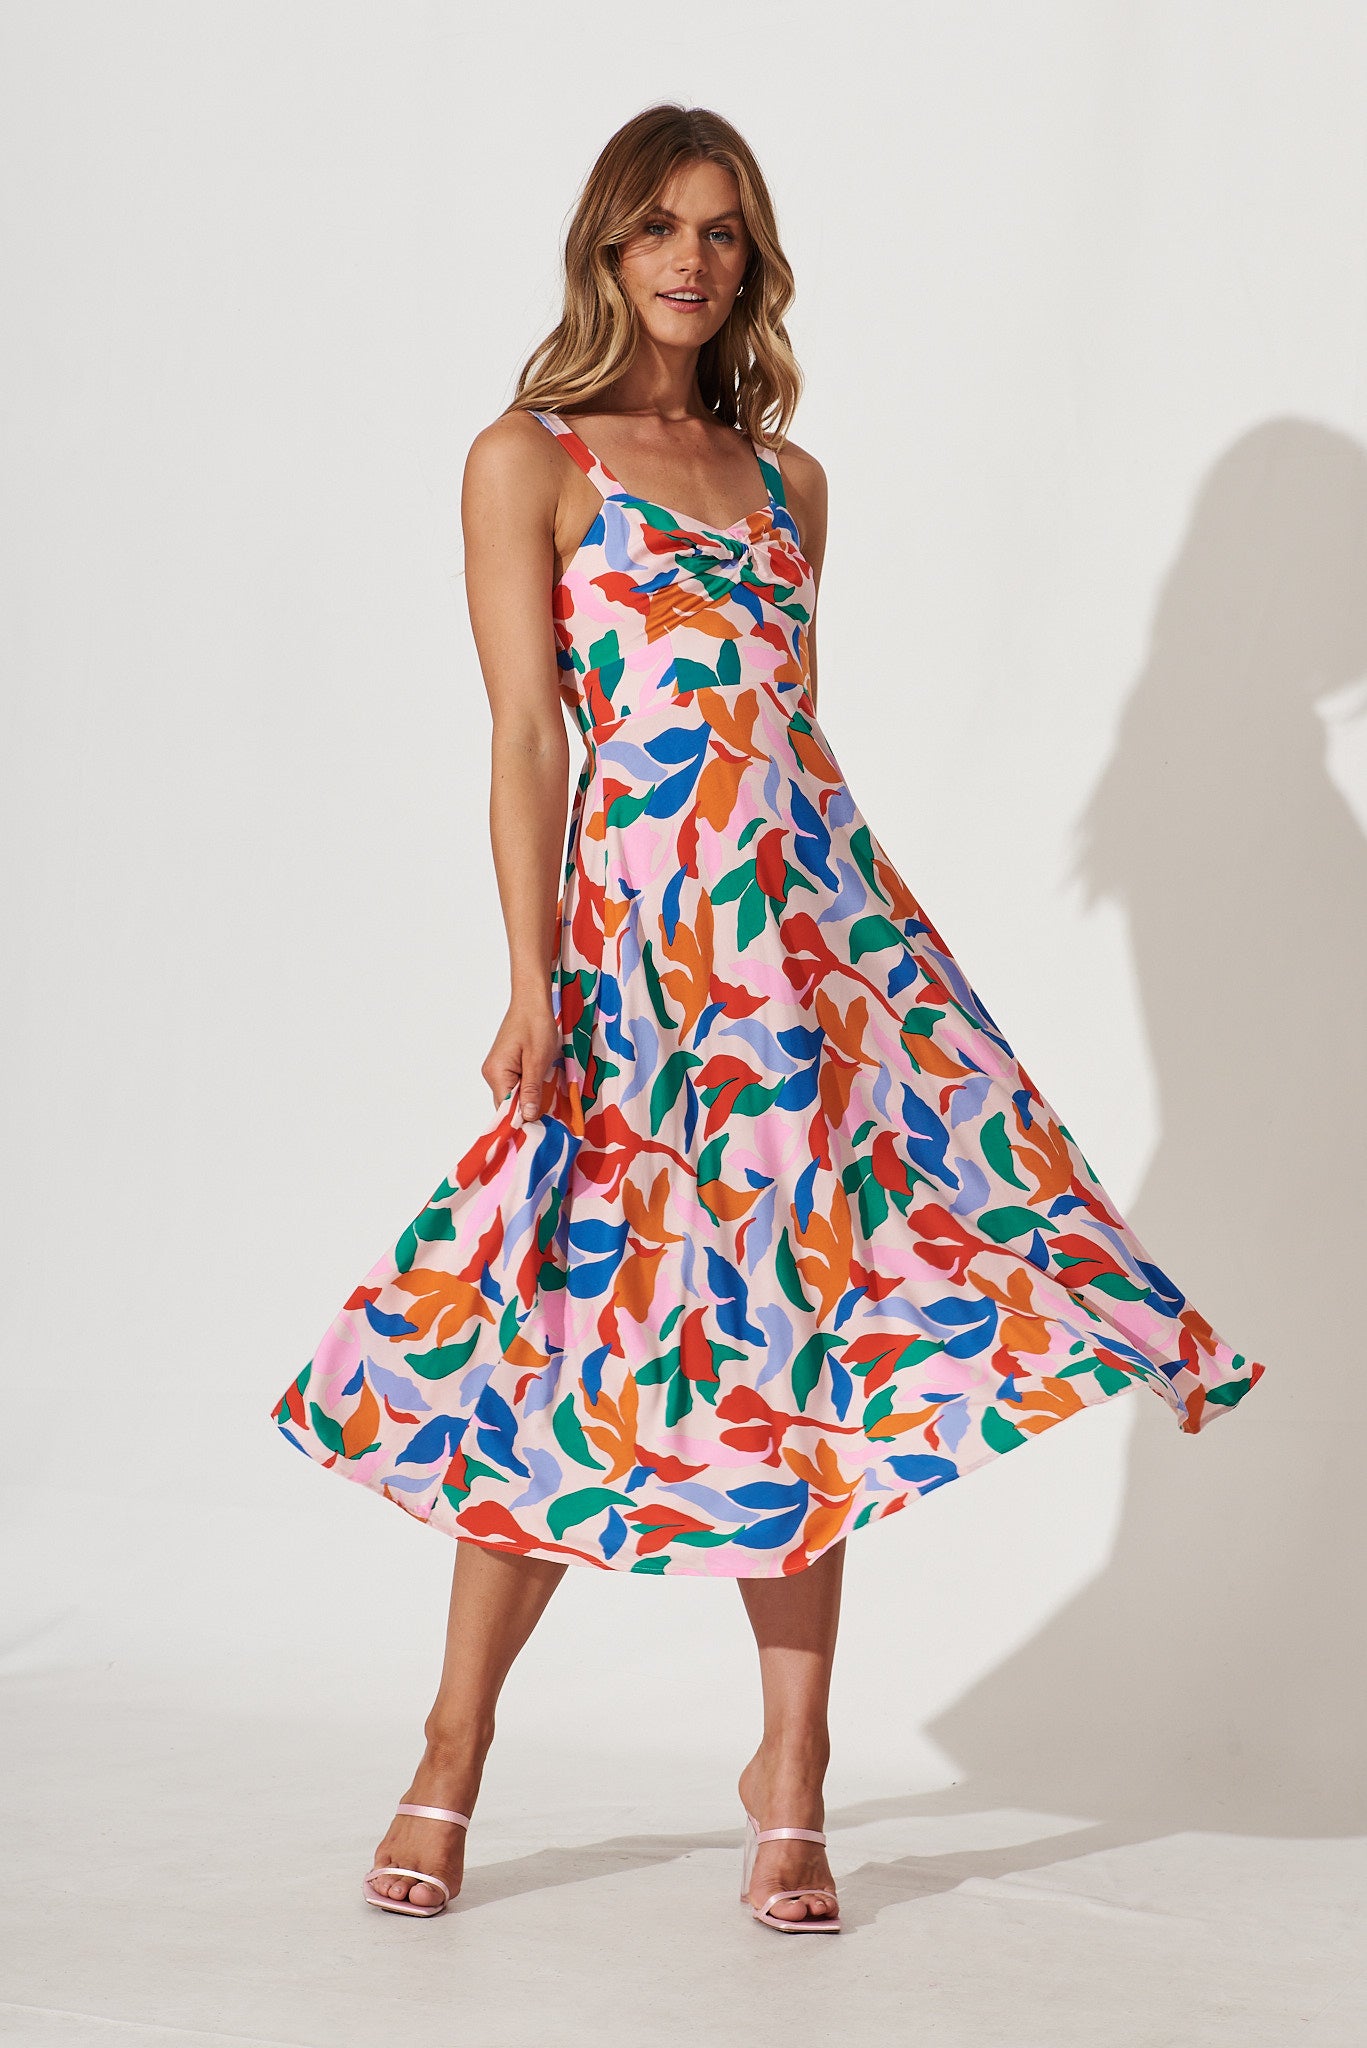 By The Sea Midi Dress In Pink With Bright Multi Leaf Print - full length